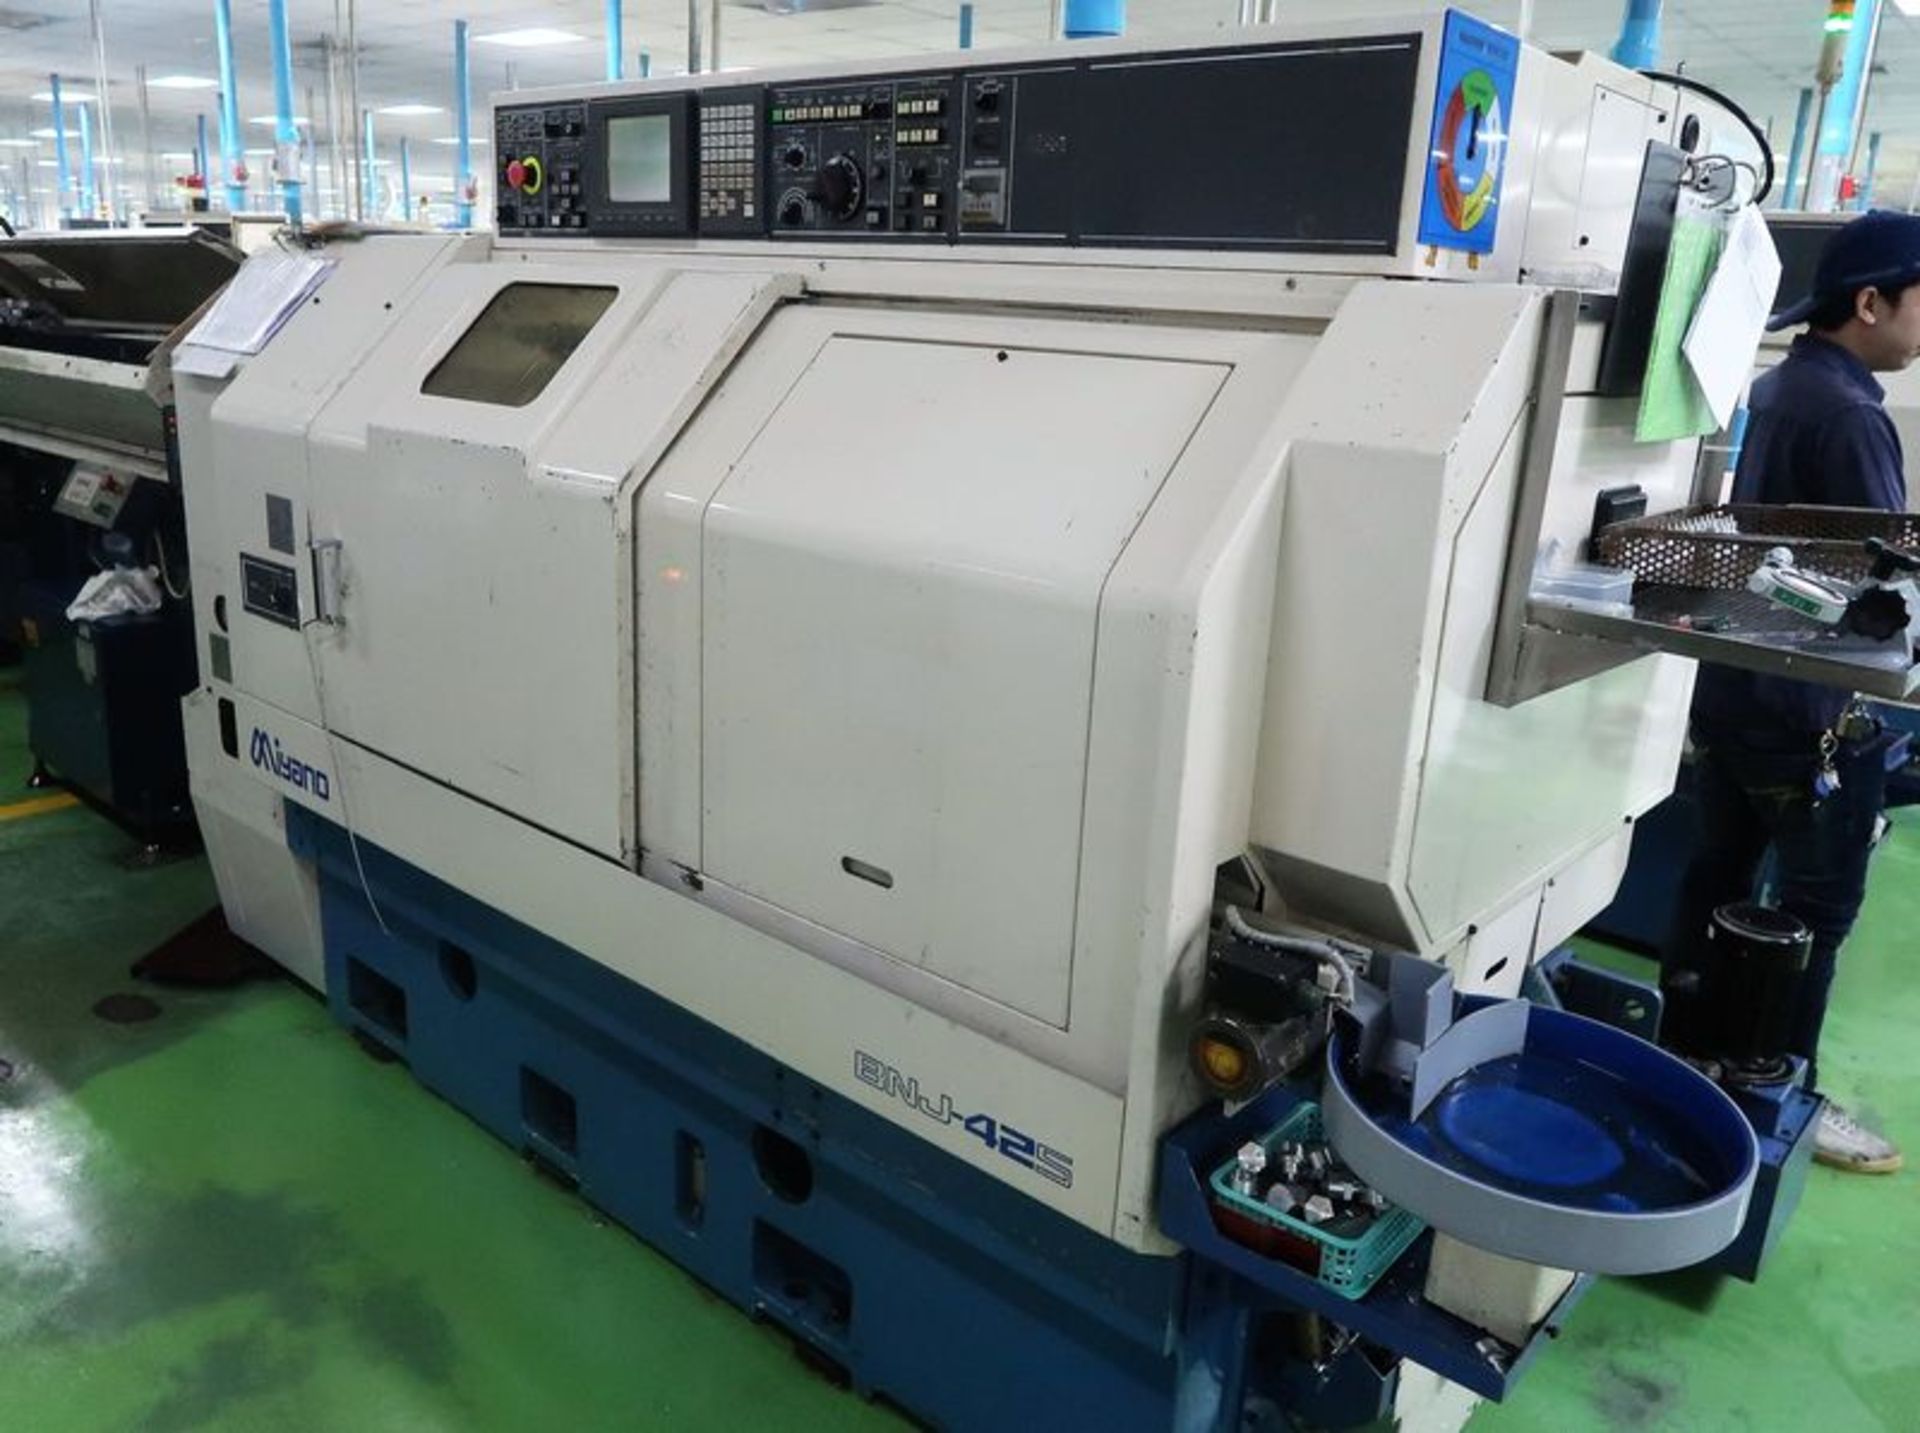 Miyano BNJ-42S 2 Spindle, 2 Turrets, Live Tools, C-Axis, S/N BN85608S new 2007 - Image 12 of 13